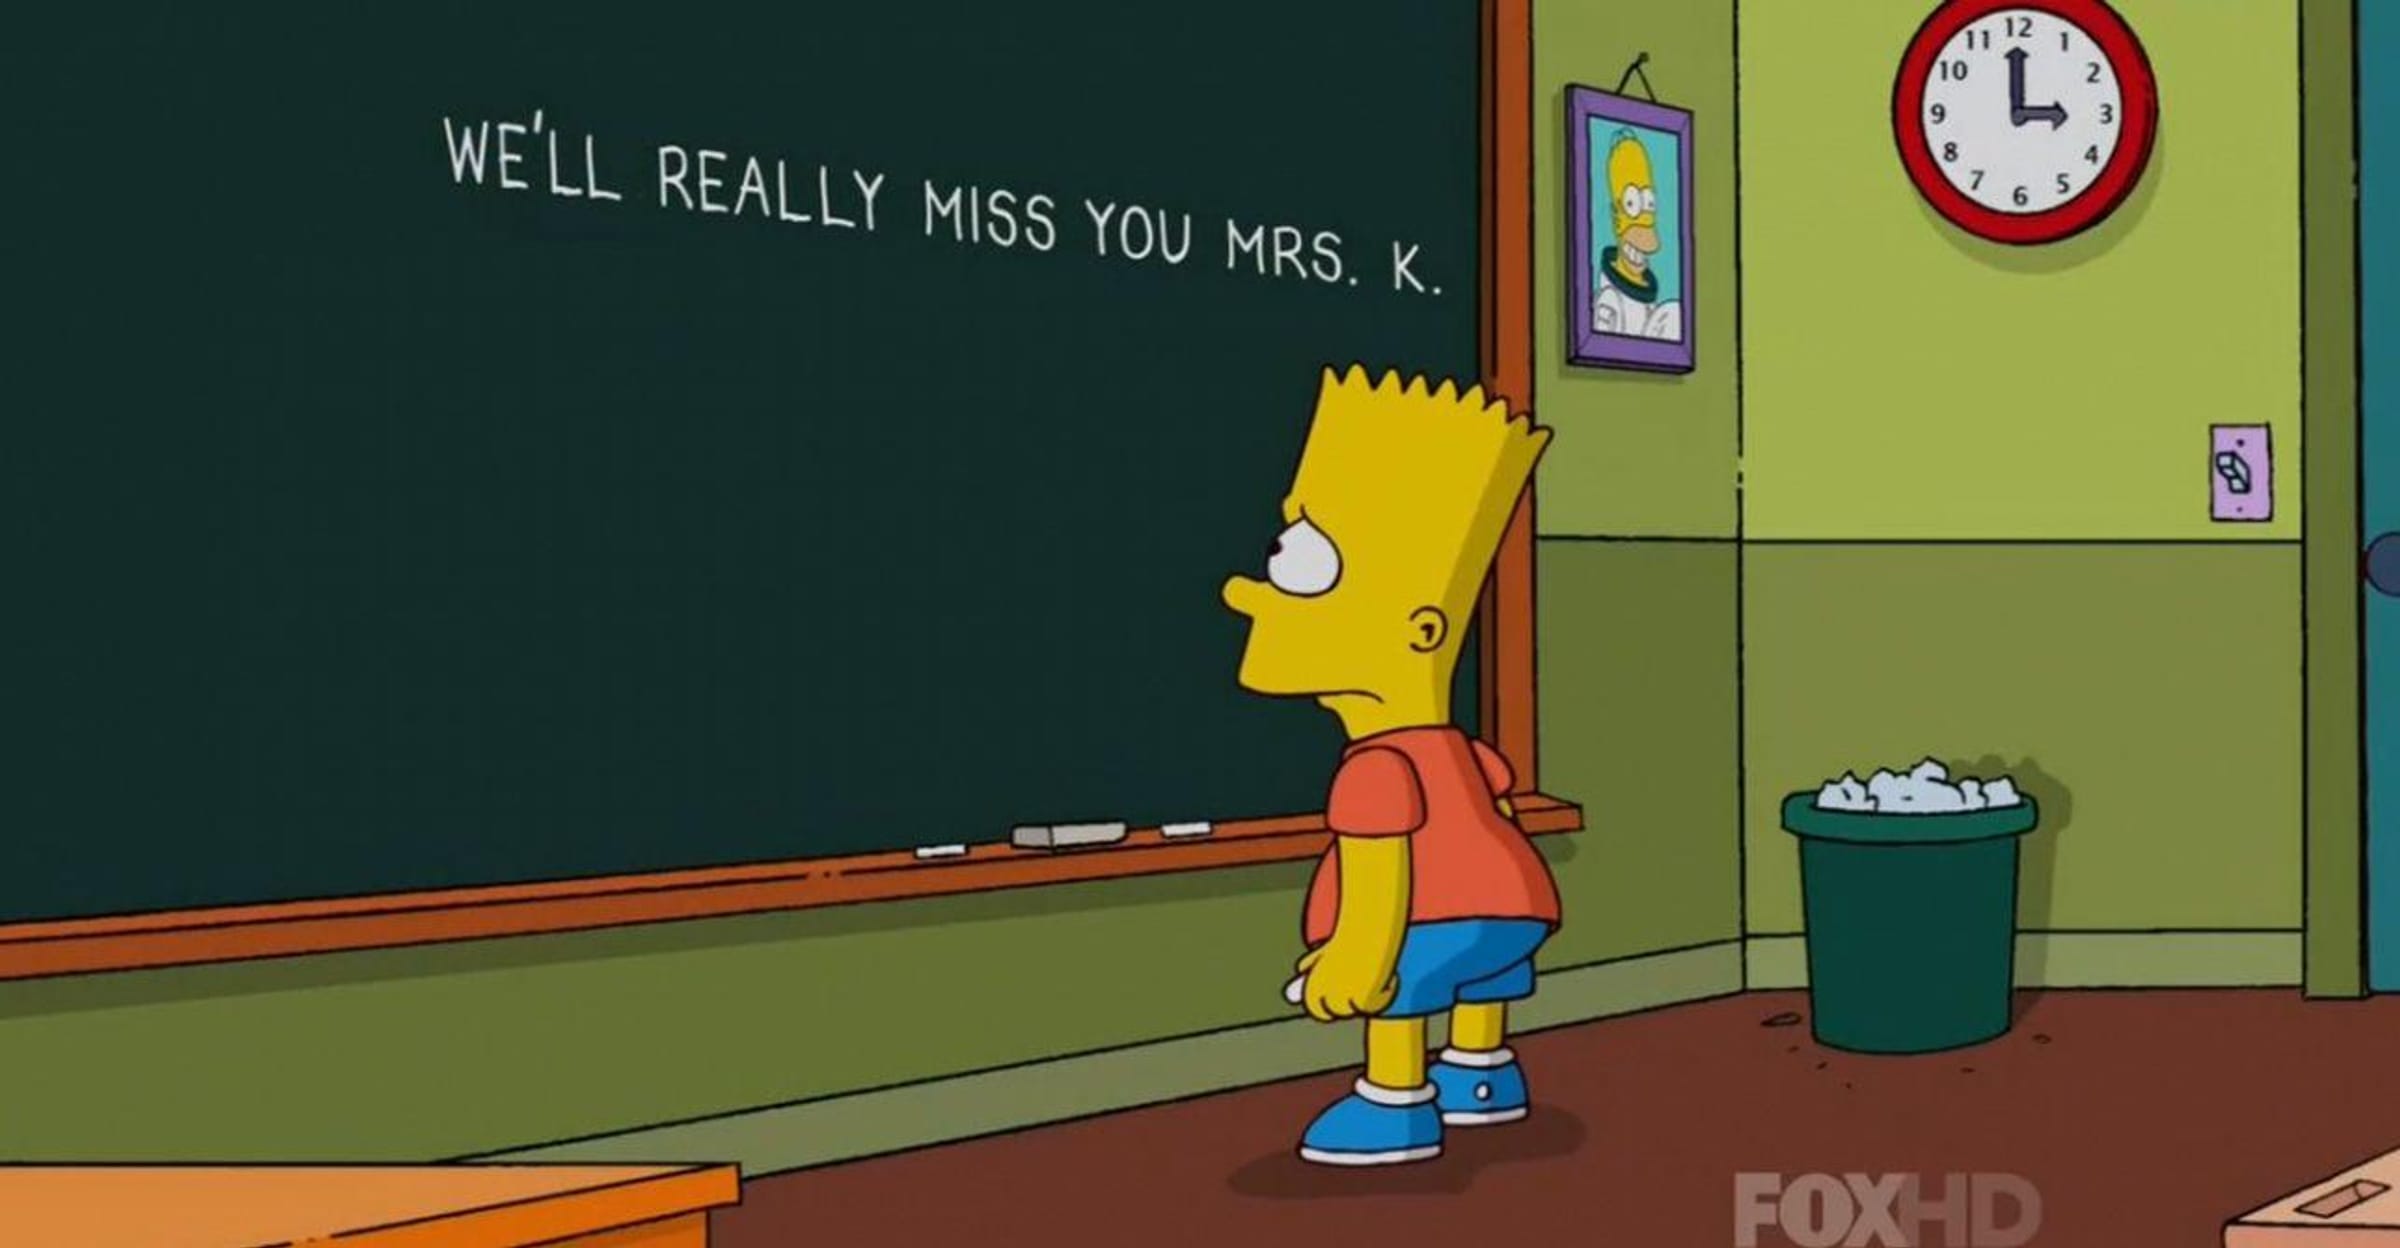 Top 20 Simpsons Moments That Will Make You Cry